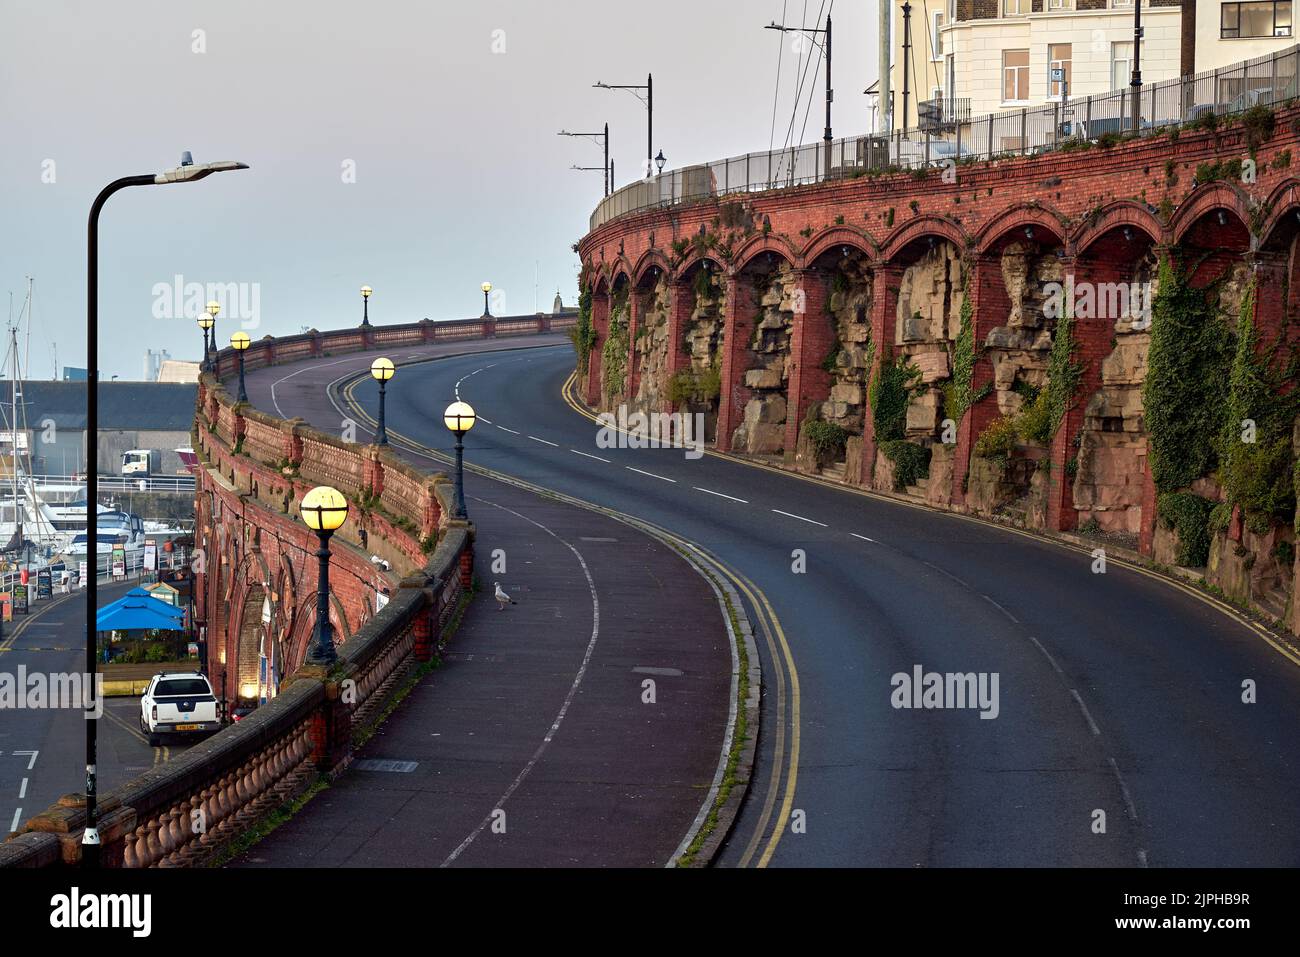 The road passing near the arches and balustrades of Royal Parade in Ramsgate, UK Stock Photo